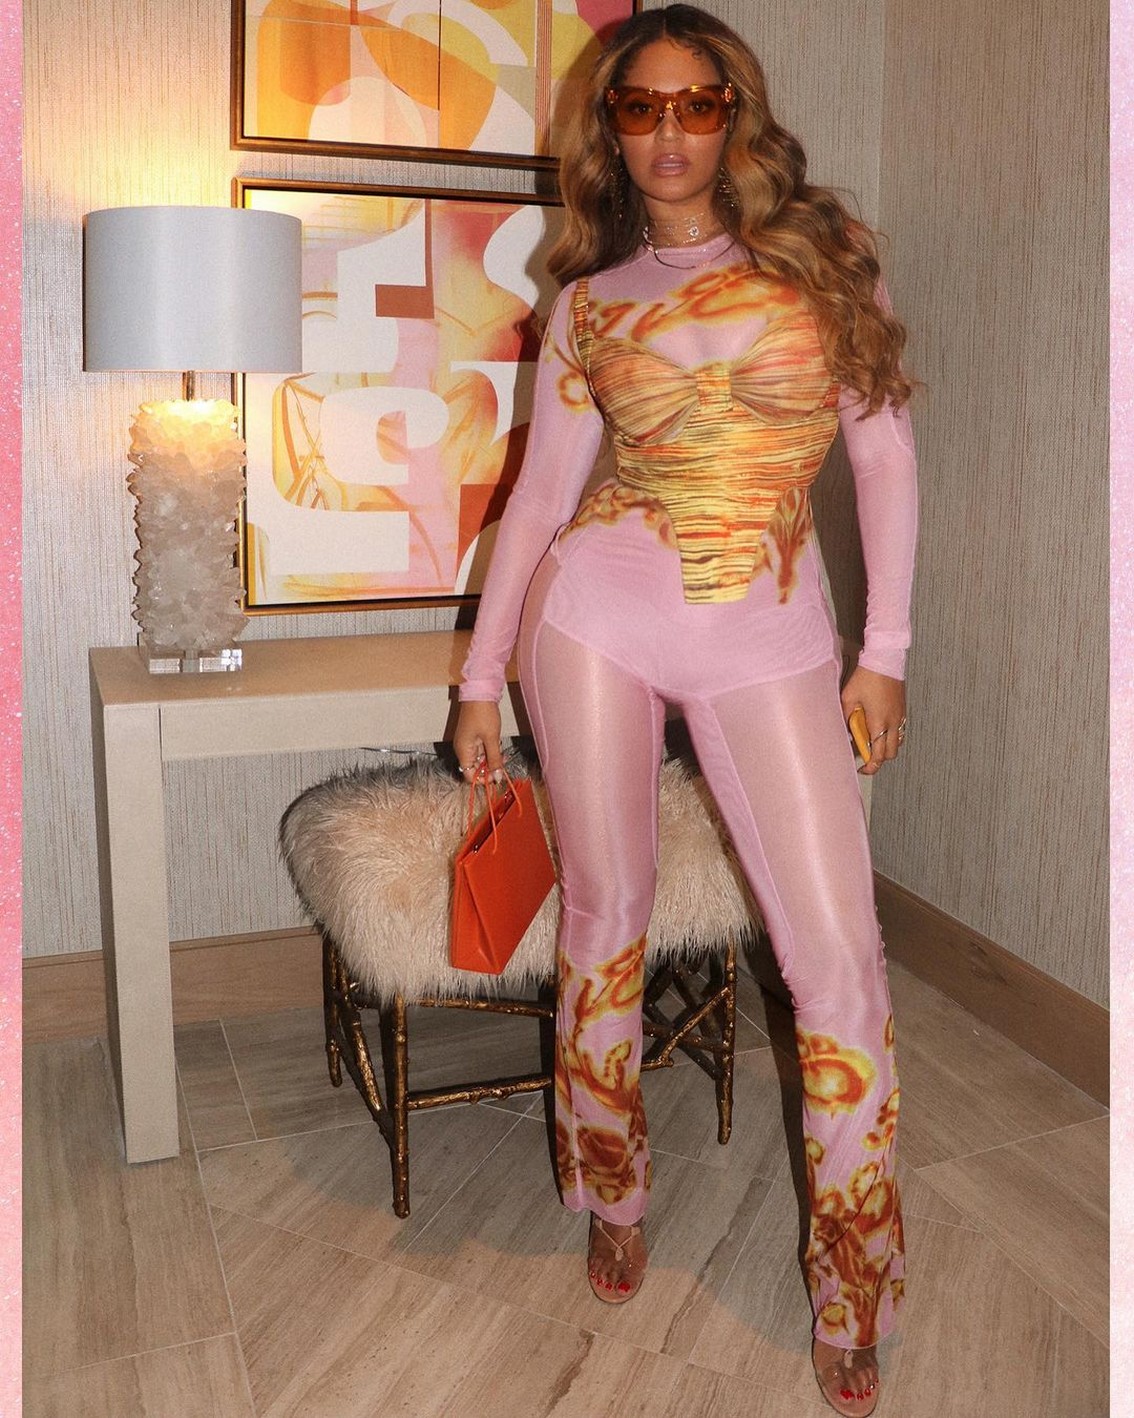 Beyonce Knowles Showed Off A Seductive Look In Pink Style Photos Fappeningtime